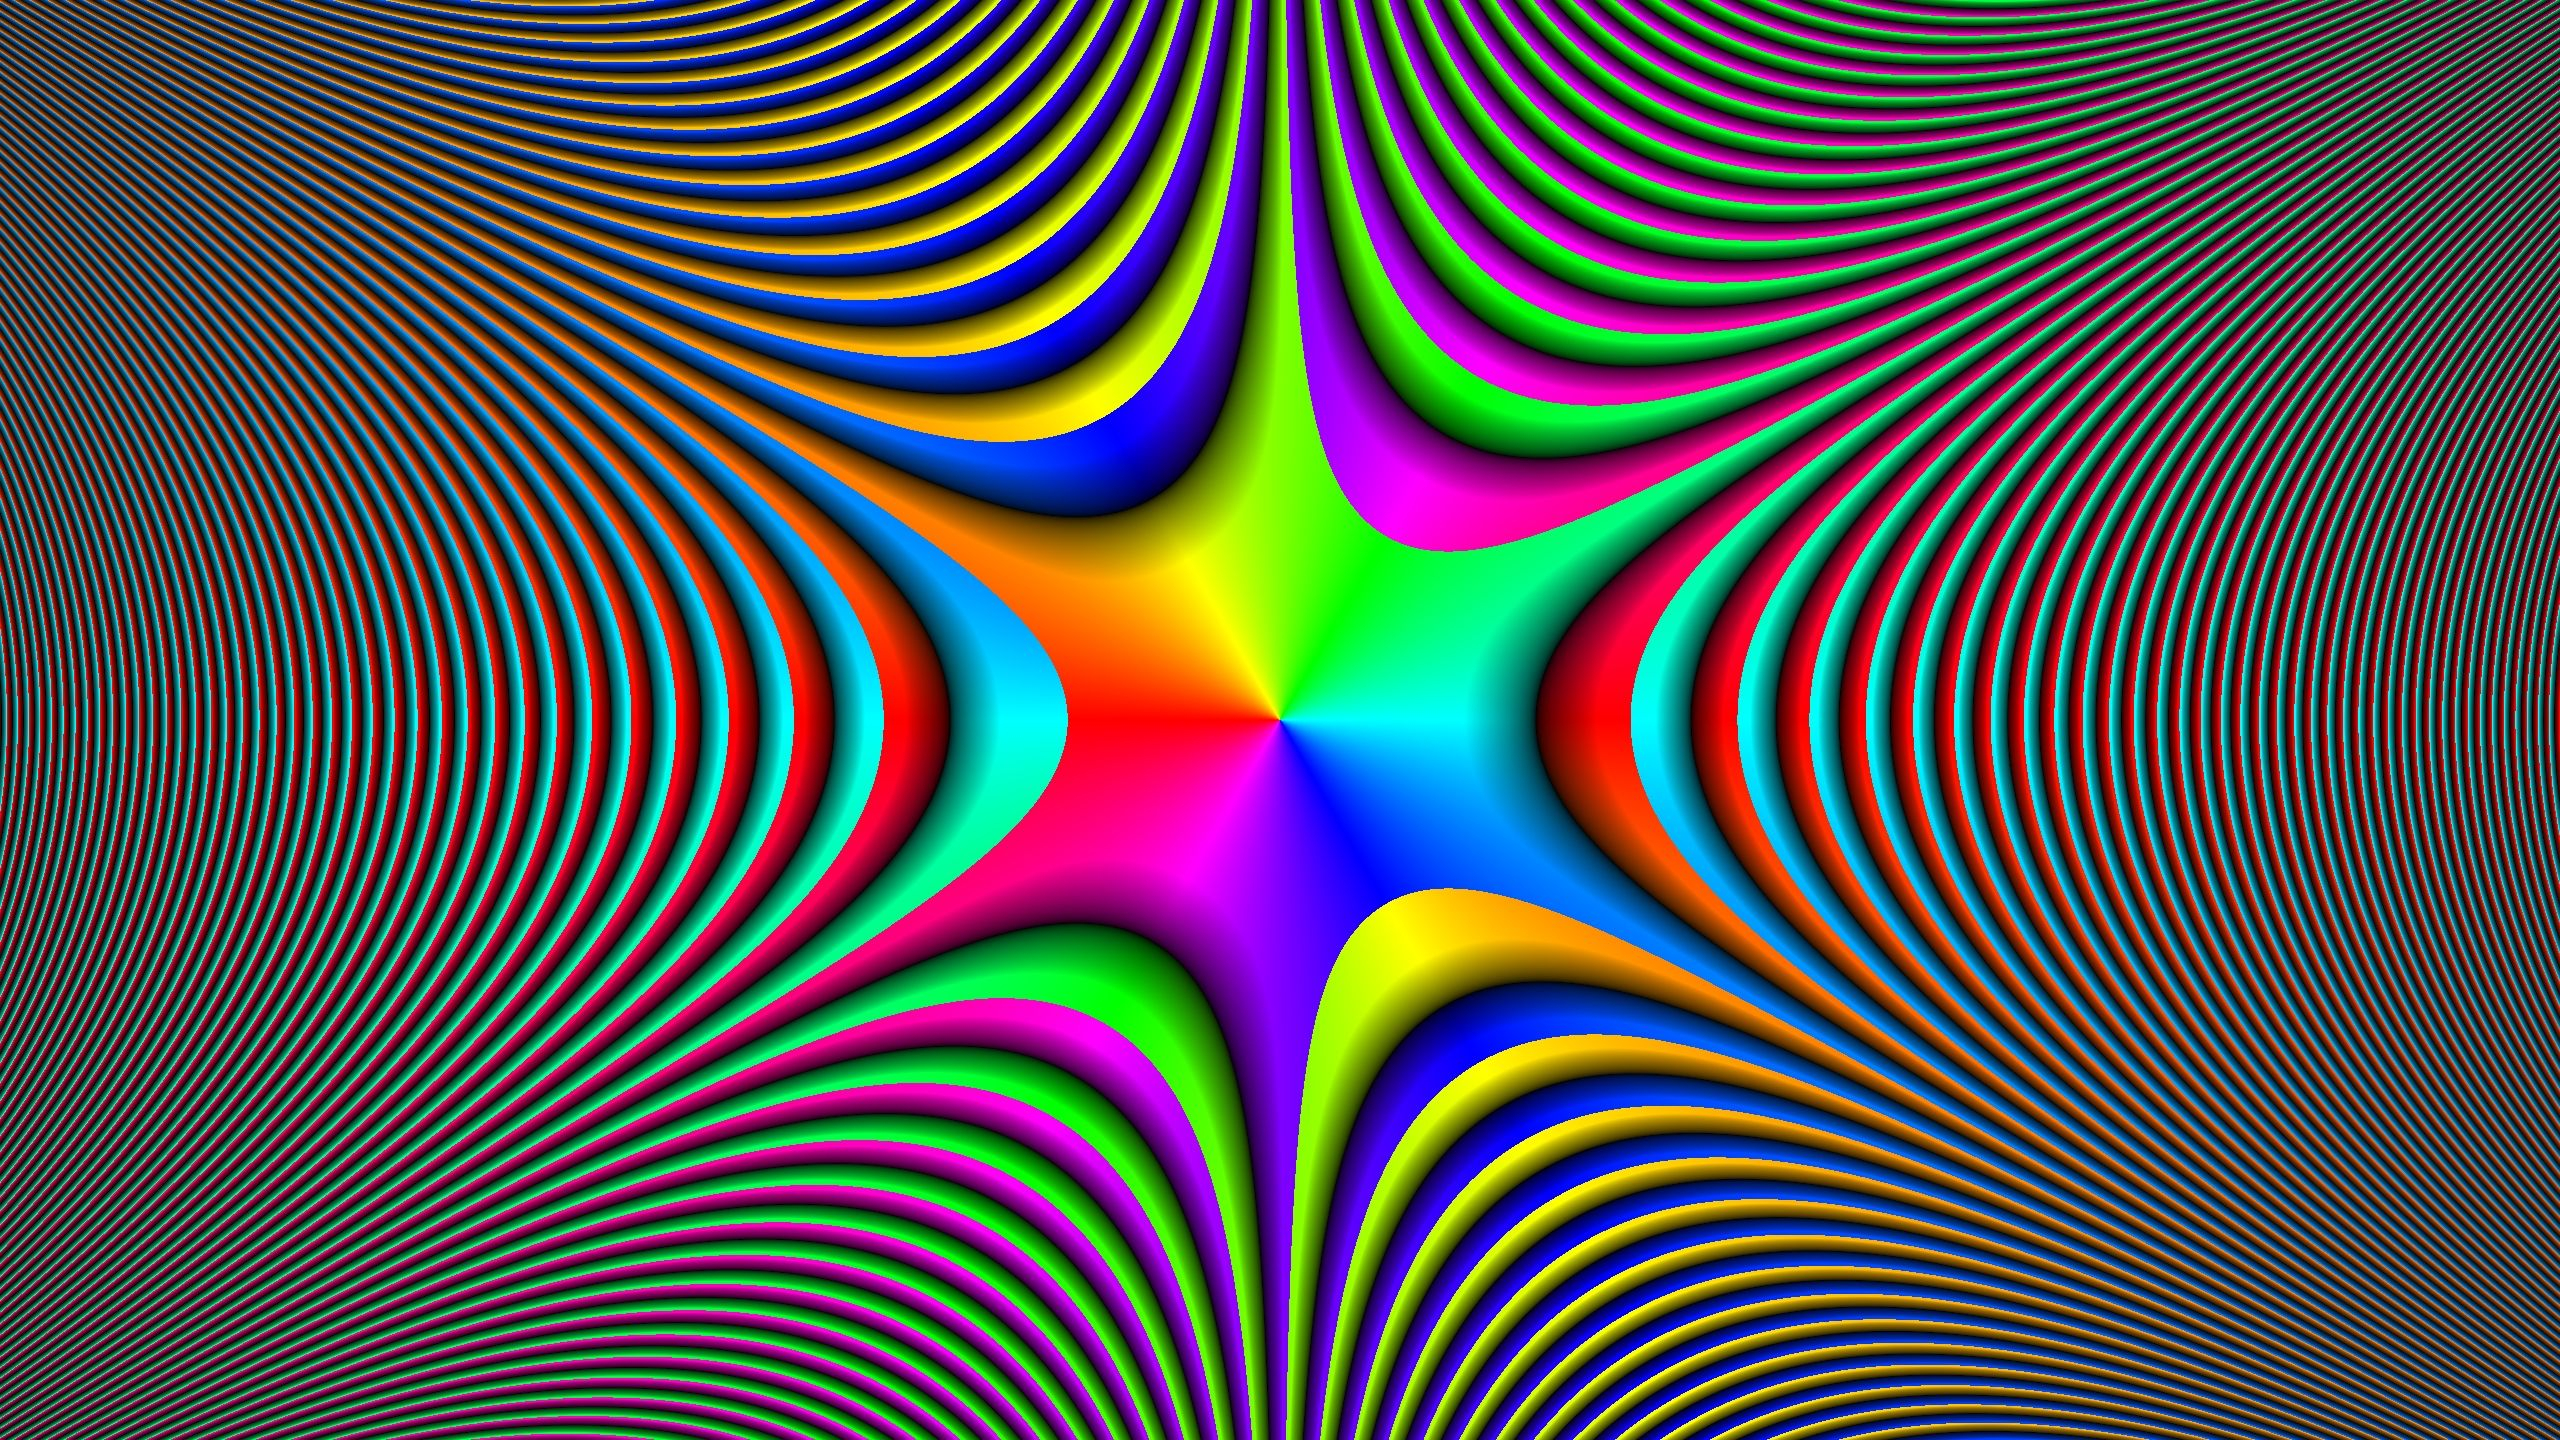 2560x1440 4K Optical Illusion Wallpapers Top Free 4K Optical Illusion Backgrounds